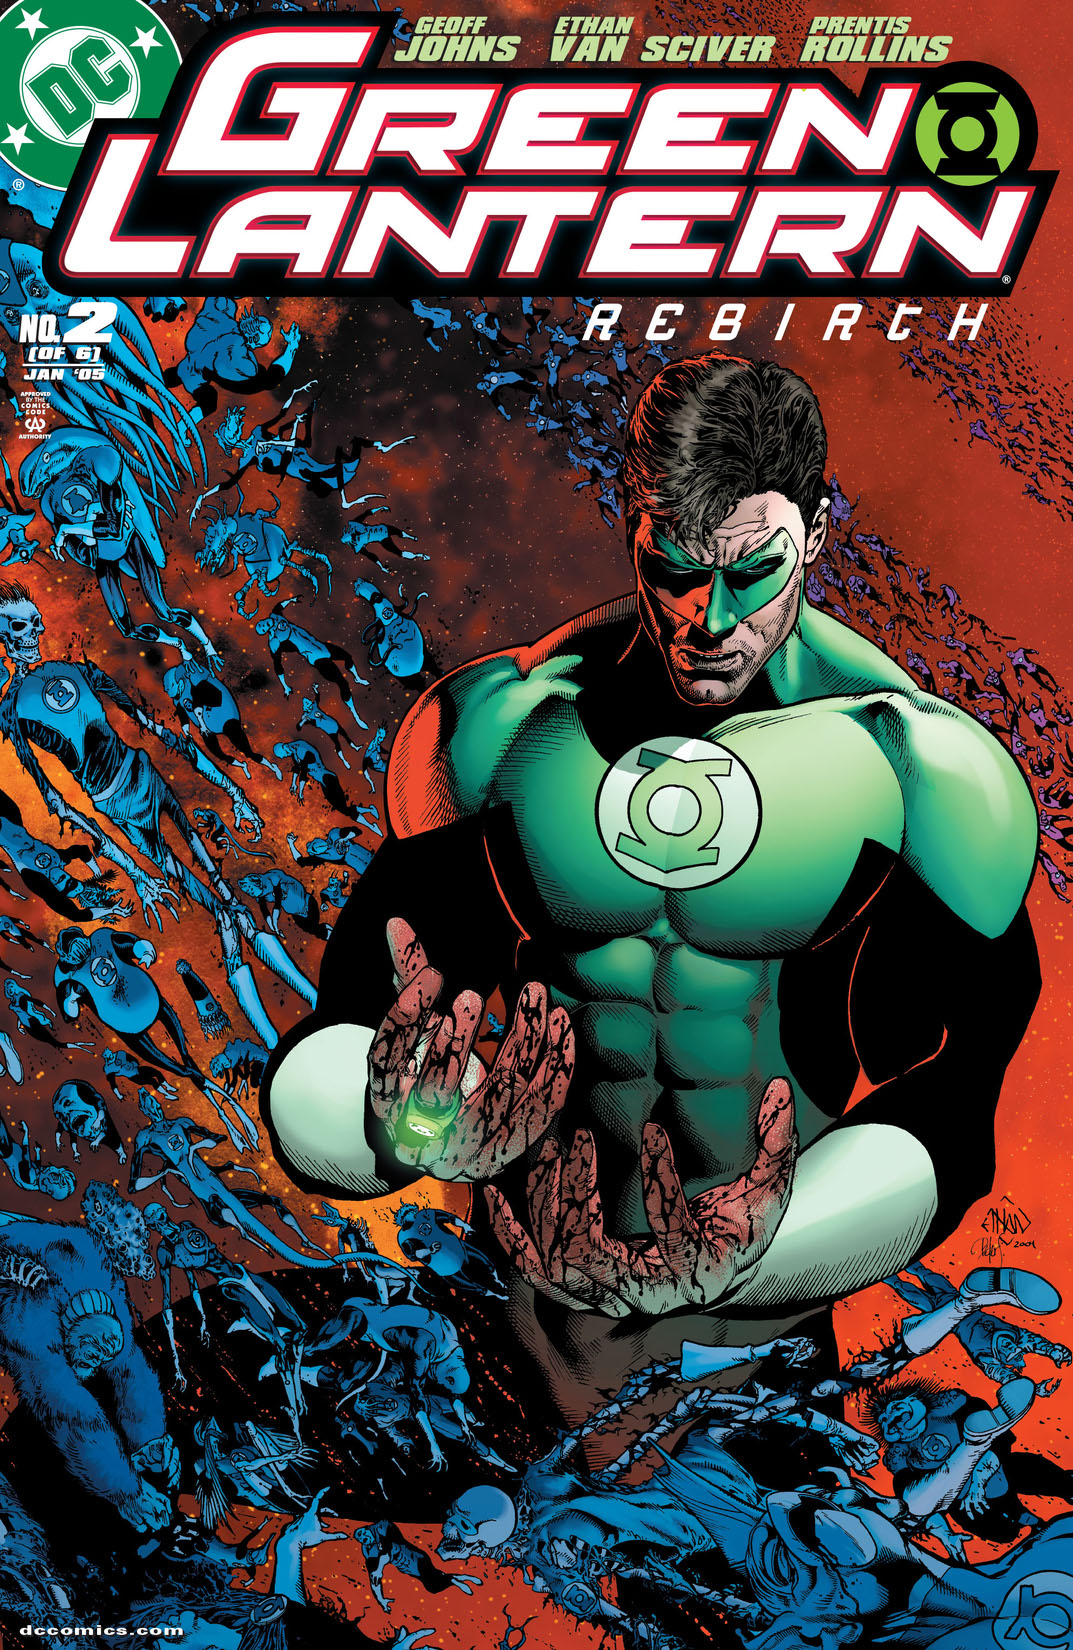 Green Lantern: Rebirth #2 preview images